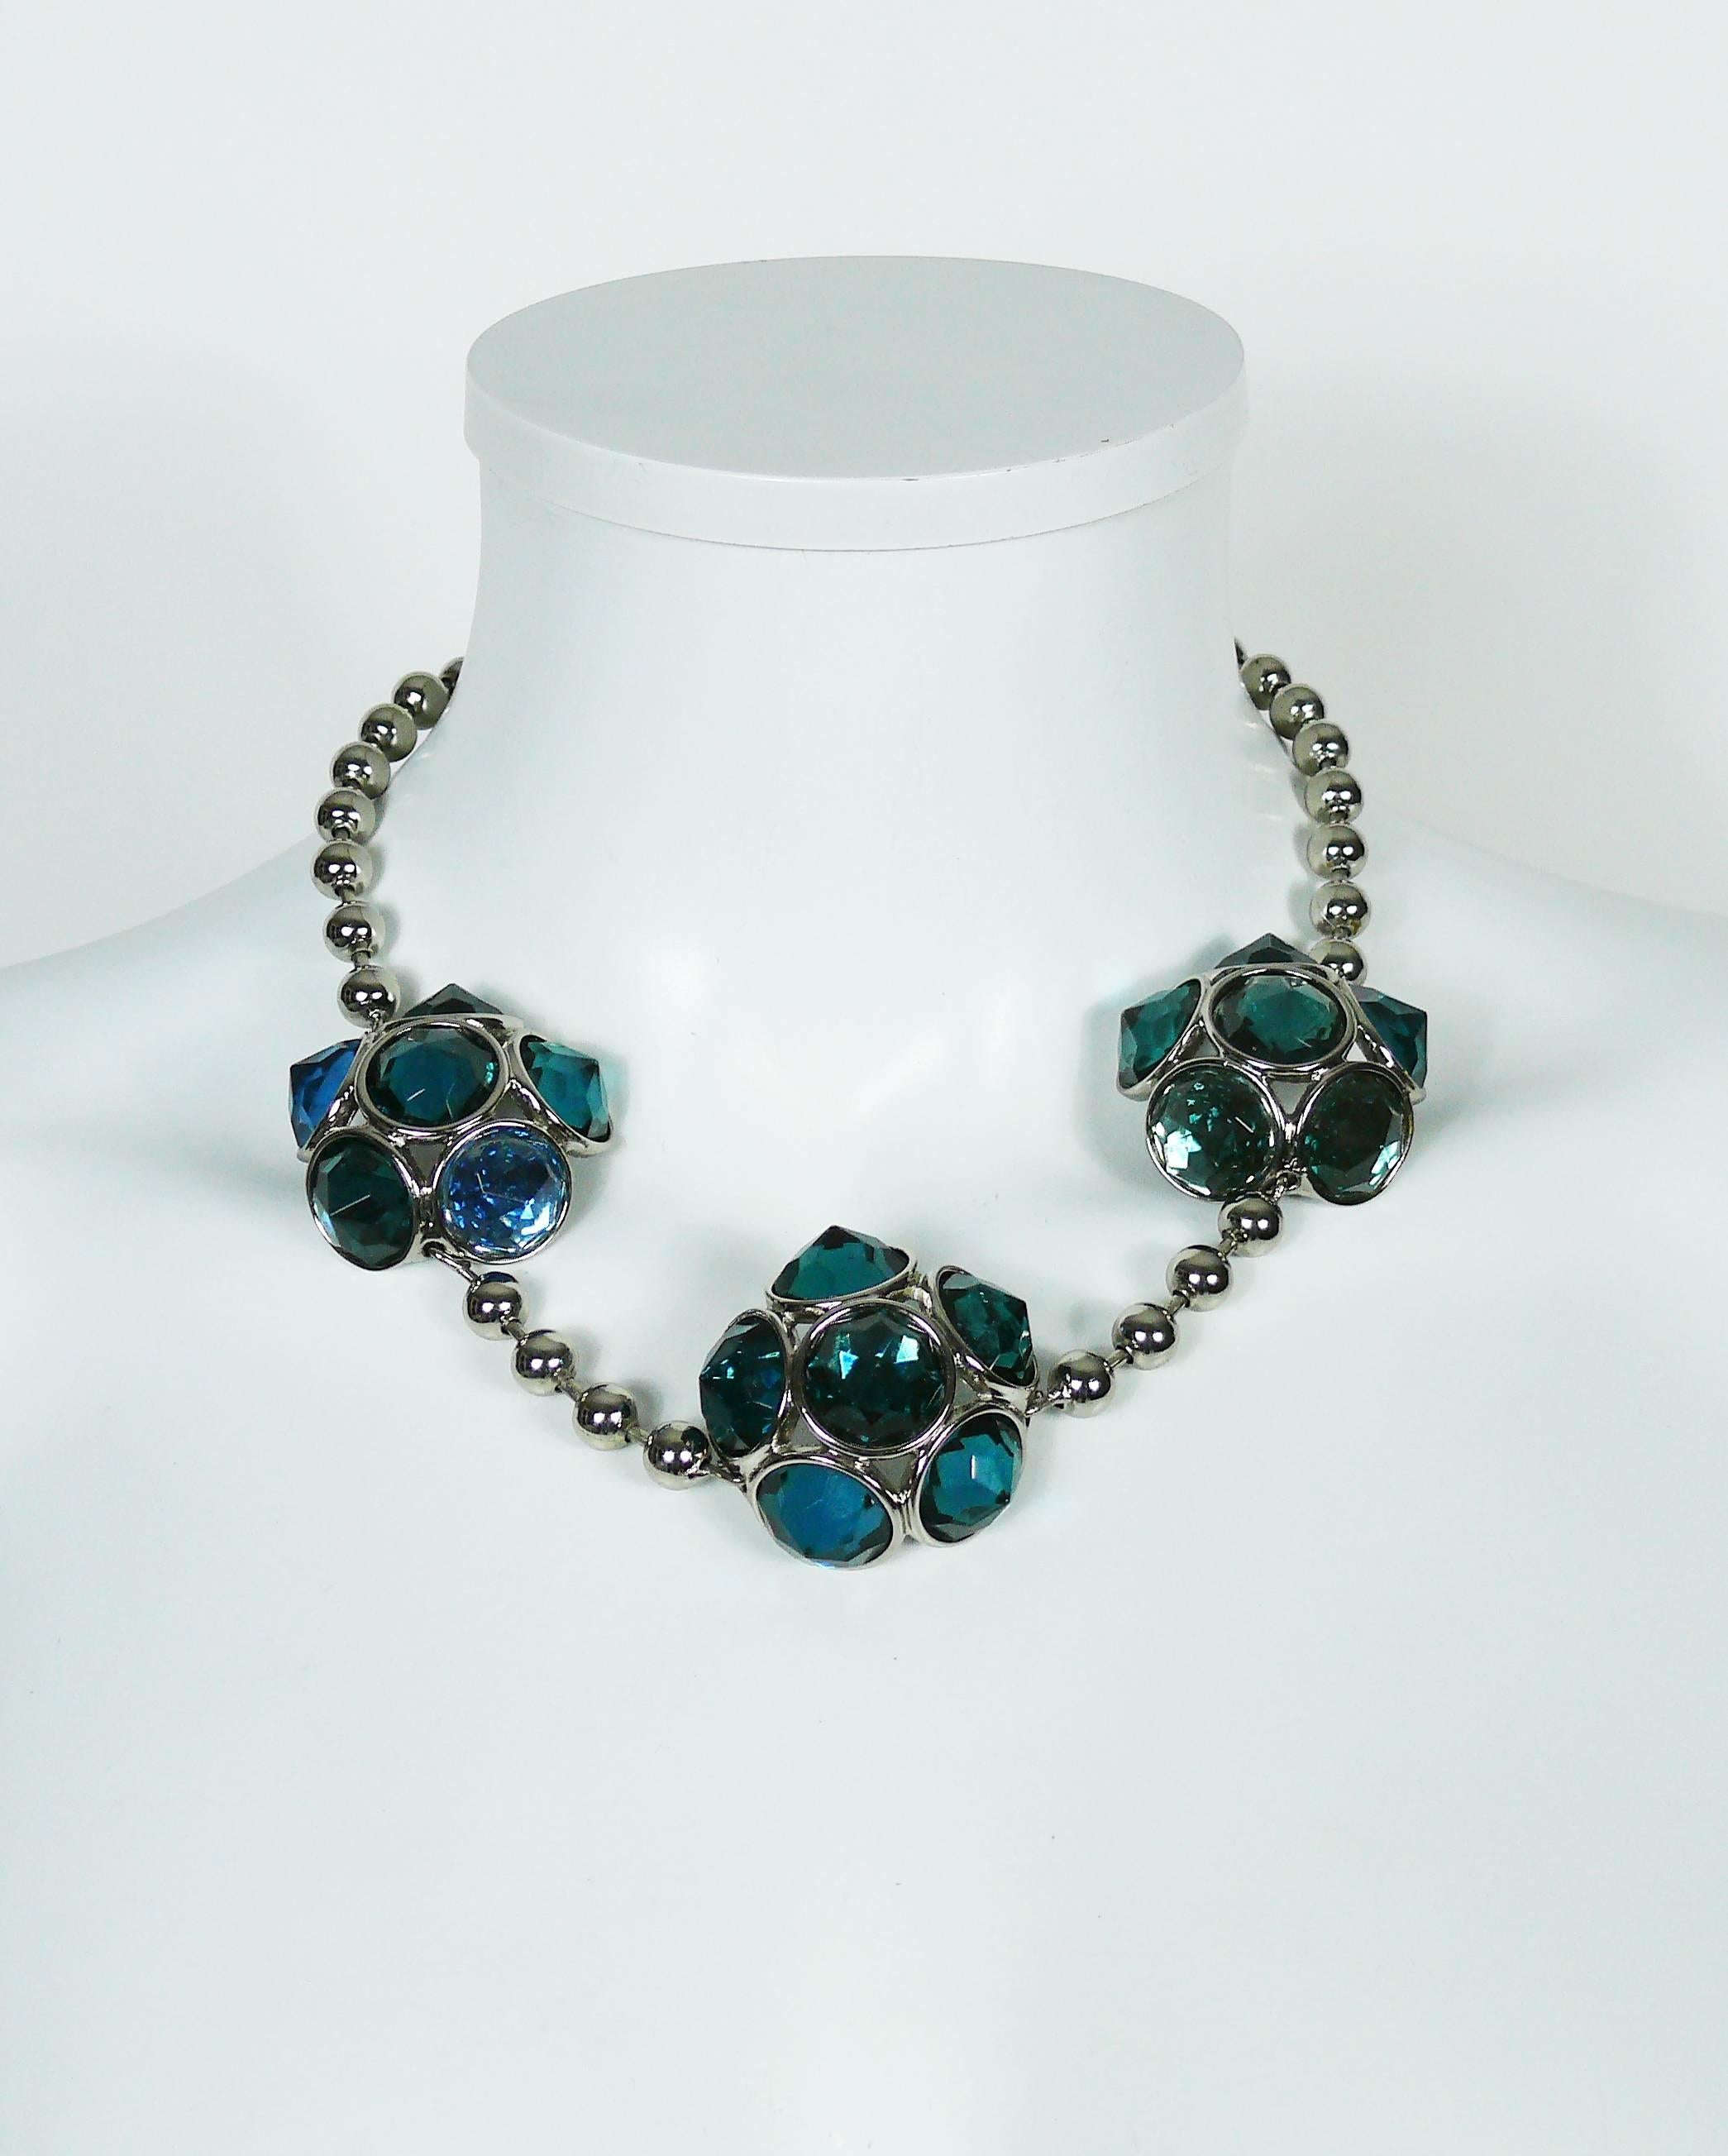 YVES SAINT LAURENT vintage silver toned necklace featuring faceted green-blue resin cabochons and ball link chain.

Lobster clasp closure.
Extension chain.

Embossed YSL Made in France.

Indicative measurements : adjustable length from approx. 47 cm